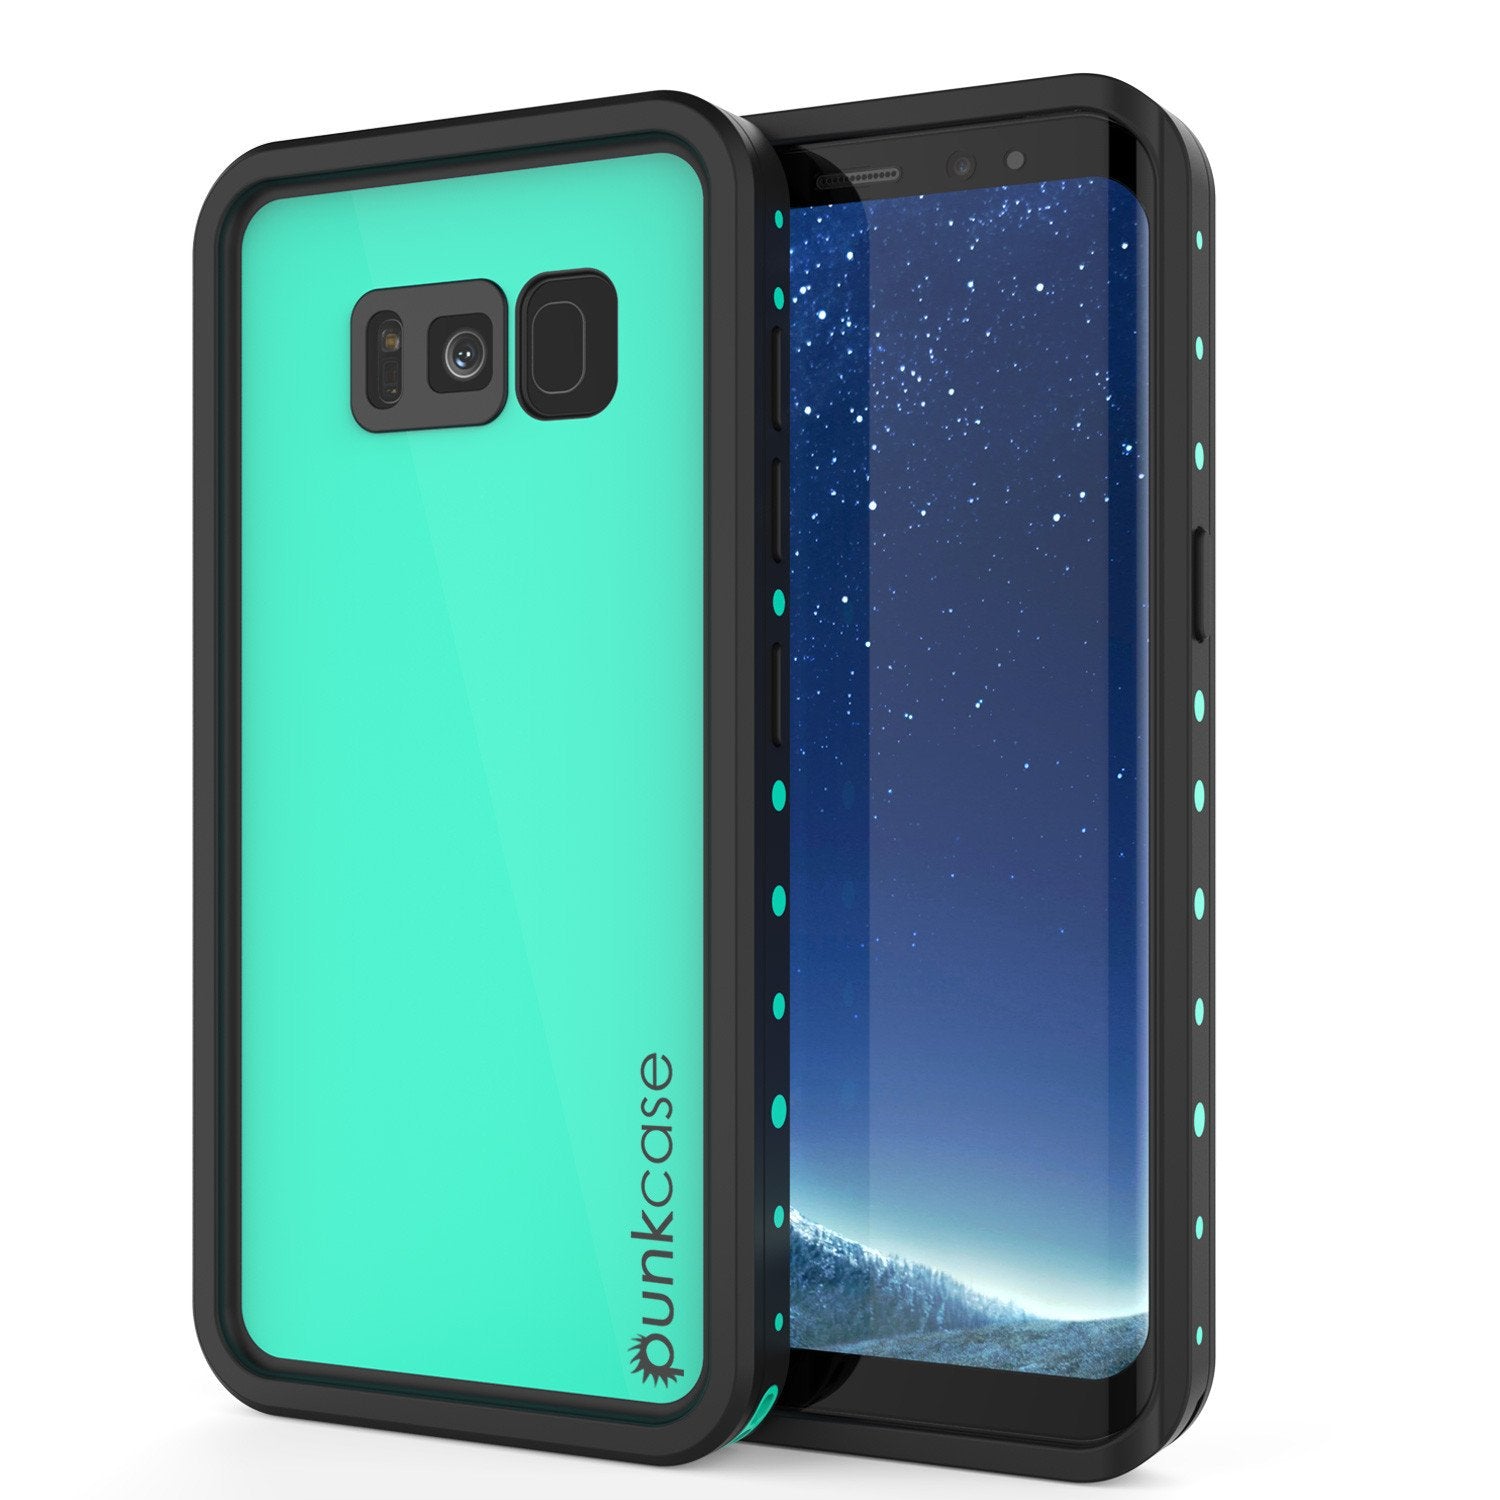 Galaxy S8 Plus Water/Dirt/Shock/Snow Proof Case [Teal]